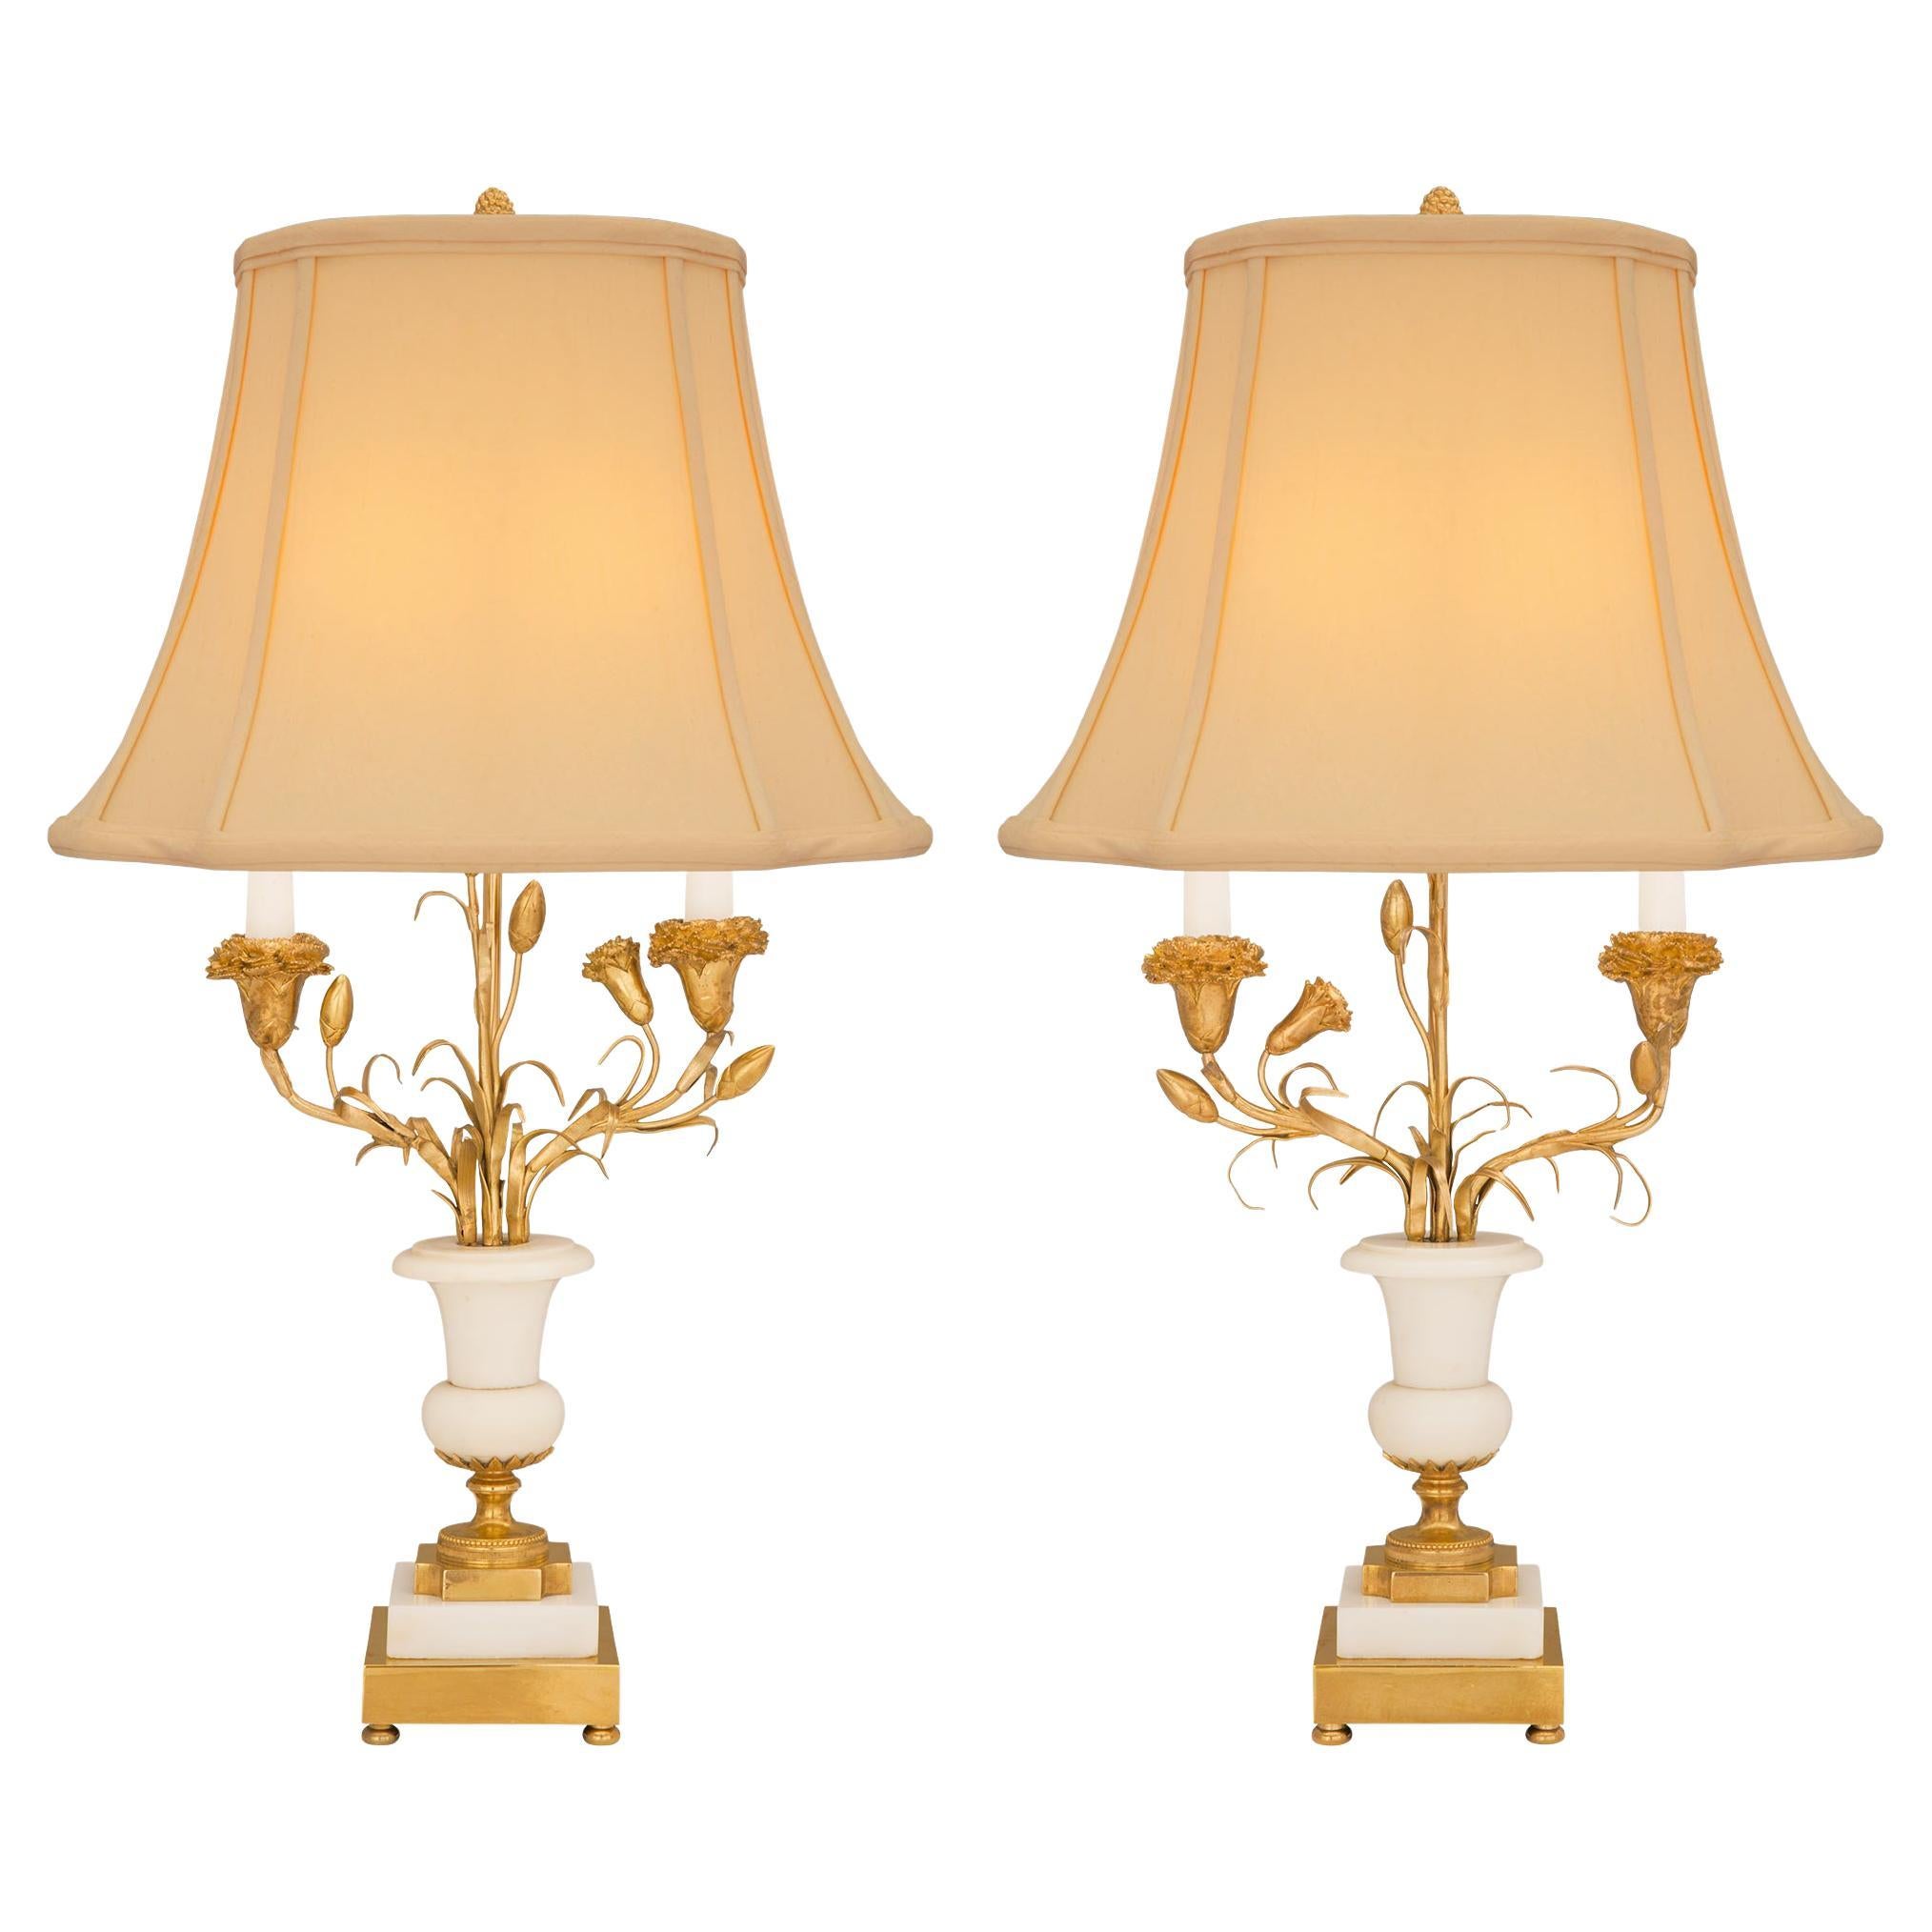 Pair of French Late 19th Century Louis XVI Style Candelabras Mounted into Lamps For Sale